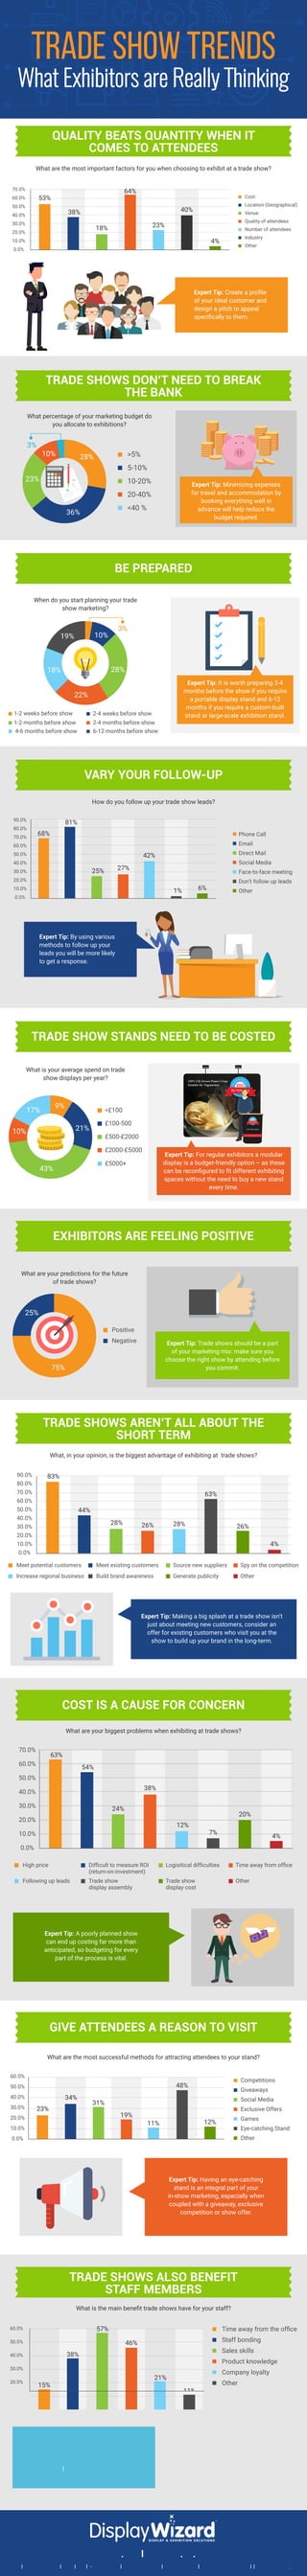 What Exhibitors are Really Thinking
Trade Show Trends
QUALITY BEATS QUANTITY WHEN IT
COMES TO ATTENDEES
What are the most successful methods for attracting attendees to your stand?
GIVE ATTENDEES A REASON TO VISIT
Competitions
Giveaways
Social Media
Exclusive Offers
Games
Eye-catching Stand
Other
60.0%
50.0%
40.0%
30.0%
20.0%
10.0%
0.0%
Expert Tip: Having an eye-catching
stand is an integral part of your
in-show marketing, especially when
coupled with a giveaway, exclusive
competition or show offer.
EXHIBITORS ARE FEELING POSITIVE
Expert Tip: Trade shows should be a part
of your marketing mix: make sure you
choose the right show by attending before
you commit.
What are your predictions for the future
of trade shows?
Positive
Negative
75%
25%
TRADE SHOW STANDS NEED TO BE COSTED
What is your average spend on trade
show displays per year?
<£100
£100-500
£500-£2000
£2000-£5000
£5000+
Expert Tip: For regular exhibitors a modular
display is a budget-friendly option – as these
can be reconﬁgured to ﬁt different exhibiting
spaces without the need to buy a new stand
every time.
9%
21%
43%
10%
17%
When do you start planning your trade
show marketing?
BE PREPARED
Expert Tip: It is worth preparing 2-4
months before the show if you require
a portable display stand and 6-12
months if you require a custom-built
stand or large-scale exhibition stand.1-2 weeks before show 2-4 weeks before show
6-12 months before show
1-2 months before show 2-4 months before show
4-6 months before show
3%
10%
28%
22%
18%
19%
TRADE SHOWS DON’T NEED TO BREAK
THE BANK
What percentage of your marketing budget do
you allocate to exhibitions?
>5%
5-10%
10-20%
20-40%
<40 %
Expert Tip: Minimizing expenses
for travel and accommodation by
booking everything well in
advance will help reduce the
budget required.
28%
36%
23%
10%
3%
23%
34%
31%
19%
11%
48%
12%
COST IS A CAUSE FOR CONCERN
What are your biggest problems when exhibiting at trade shows?
High price
OtherTrade show
display cost
Trade show
display assembly
Following up leads
Time away from ofﬁceLogisitical difﬁcultiesDifﬁcult to measure ROI
(return-on-investment)
70.0%
60.0%
50.0%
40.0%
30.0%
20.0%
10.0%
0.0%
Expert Tip: A poorly planned show
can end up costing far more than
anticipated, so budgeting for every
part of the process is vital.
63%
54%
24%
38%
12%
7%
20%
4%
TRADE SHOWS AREN’T ALL ABOUT THE
SHORT TERM
What, in your opinion, is the biggest advantage of exhibiting at  trade shows?
90.0%
80.0%
70.0%
60.0%
50.0%
40.0%
30.0%
20.0%
10.0%
0.0%
Meet potential customers
OtherGenerate publicityBuild brand awarenessIncrease regional business
Spy on the competitionSource new suppliersMeet existing customers
Expert Tip: Making a big splash at a trade show isn’t
just about meeting new customers, consider an
offer for existing customers who visit you at the
show to build up your brand in the long-term.
83%
44%
28% 26% 28%
63%
26%
4%
VARY YOUR FOLLOW-UP
How do you follow up your trade show leads?
Other
Phone Call
Email
Direct Mail
Social Media
Face-to-face meeting
Don’t follow up leads
90.0%
80.0%
70.0%
60.0%
50.0%
40.0%
30.0%
20.0%
10.0%
0.0%
Expert Tip: By using various
methods to follow up your
leads you will be more likely
to get a response.
68%
81%
25% 27%
42%
1% 6%
What are the most important factors for you when choosing to exhibit at a trade show?
70.0%
60.0%
50.0%
40.0%
30.0%
20.0%
10.0%
0.0%
Cost
Location (Geographical)
Venue
Quality of attendees
Number of attendees
Industry
Other
Expert Tip: Create a proﬁle
of your ideal customer and
design a pitch to appeal
speciﬁcally to them.
53%
38%
18% 23%
40%
4%
64%
TRADE SHOWS ALSO BENEFIT
STAFF MEMBERS
What is the main beneﬁt trade shows have for your staff?
60.0%
50.0%
40.0%
30.0%
20.0%
10.0%
0.0%
Time away from the ofﬁce
Staff bonding
Sales skills
Product knowledge
Company loyalty
Other
Expert Tip: Take enough staff to
the show so your team
members can attend the event
talks and seminars.
11%
21%
46%
57%
38%
15%
www.displaywizard.co.uk
This survey was carried out in April - May 2017 and included 100 marketing/sales professionals who regularly exhibit at trade shows.
 